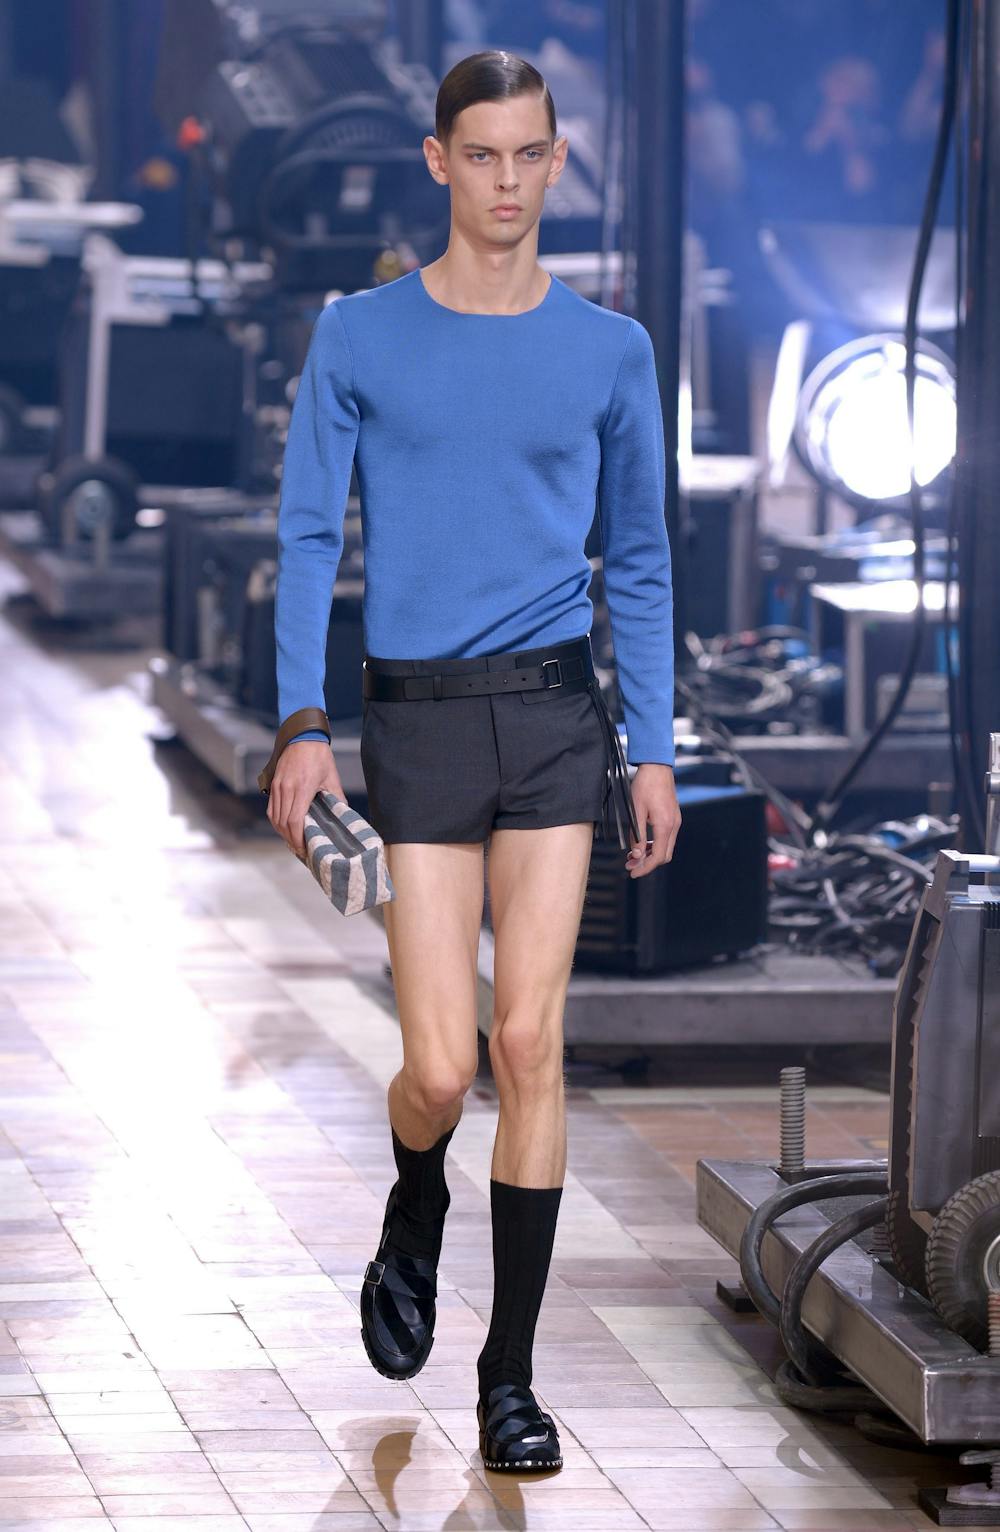 Are men's shorts getting shorter, because I've seen guy's shorts